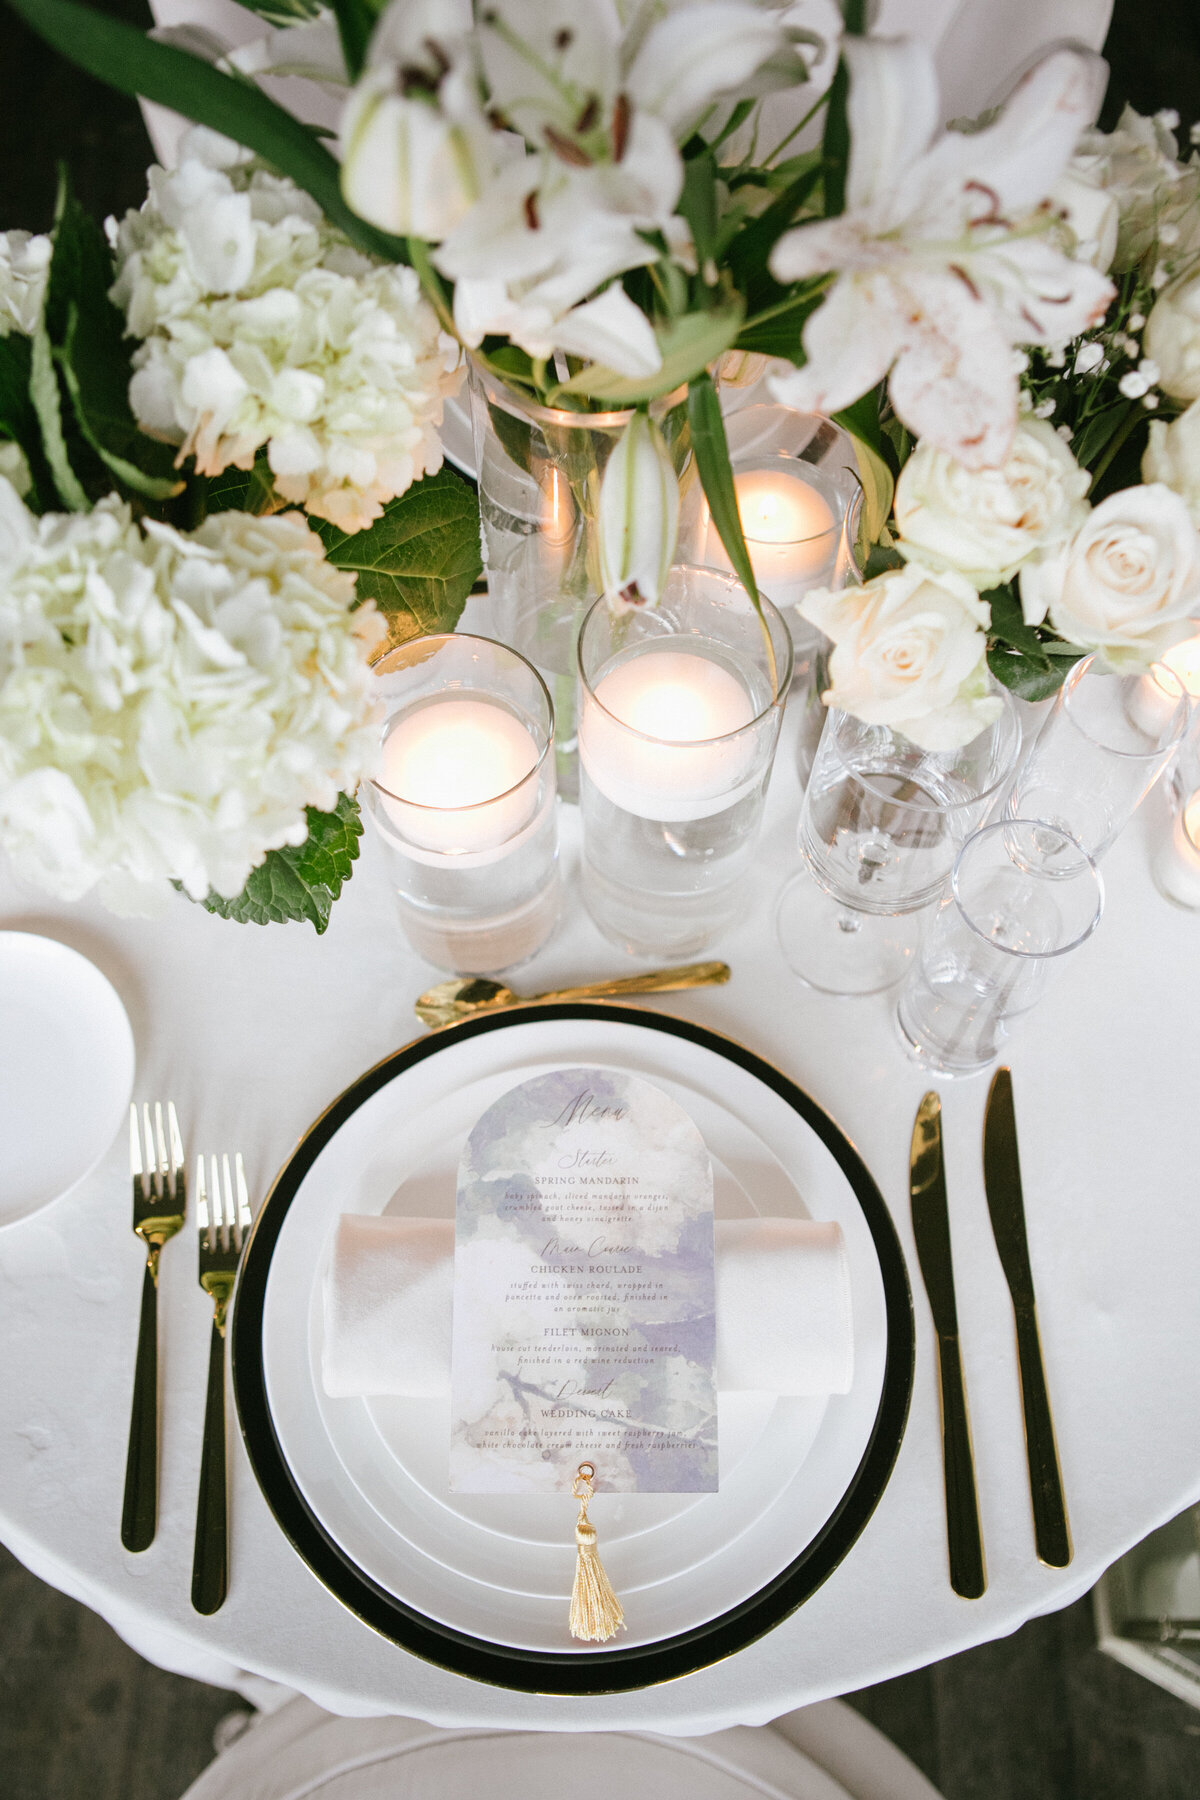 romantic wedding table setting featuring arched wedding menus, lush white floral and greenery centerpieces and candles.